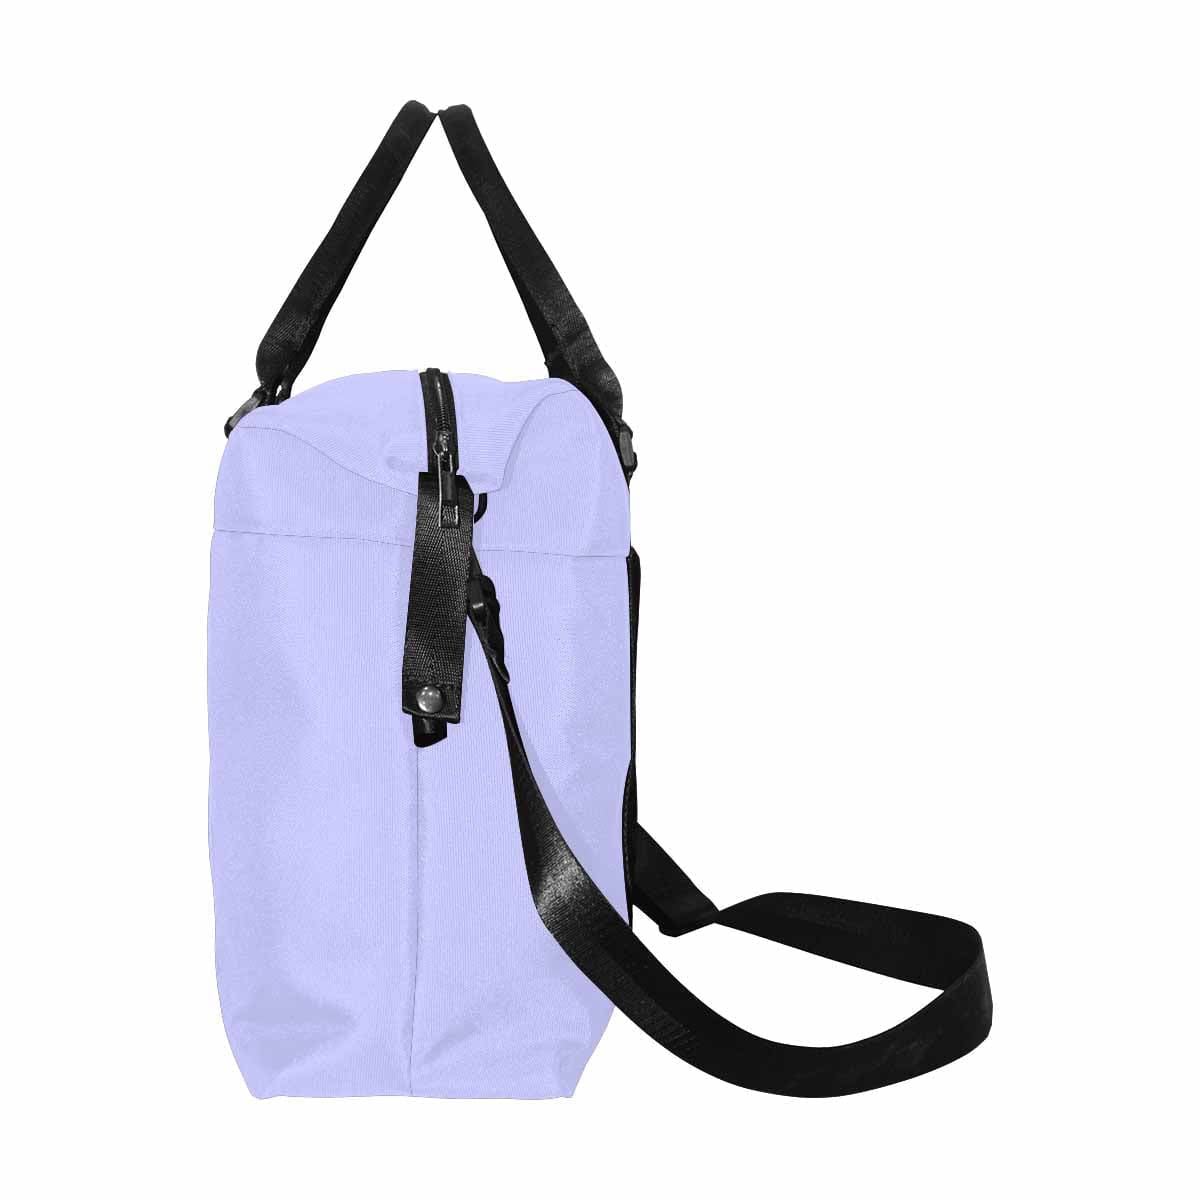 Travel Bag Periwinkle Purple Canvas Carry On - Bags | Travel Bags | Canvas Carry